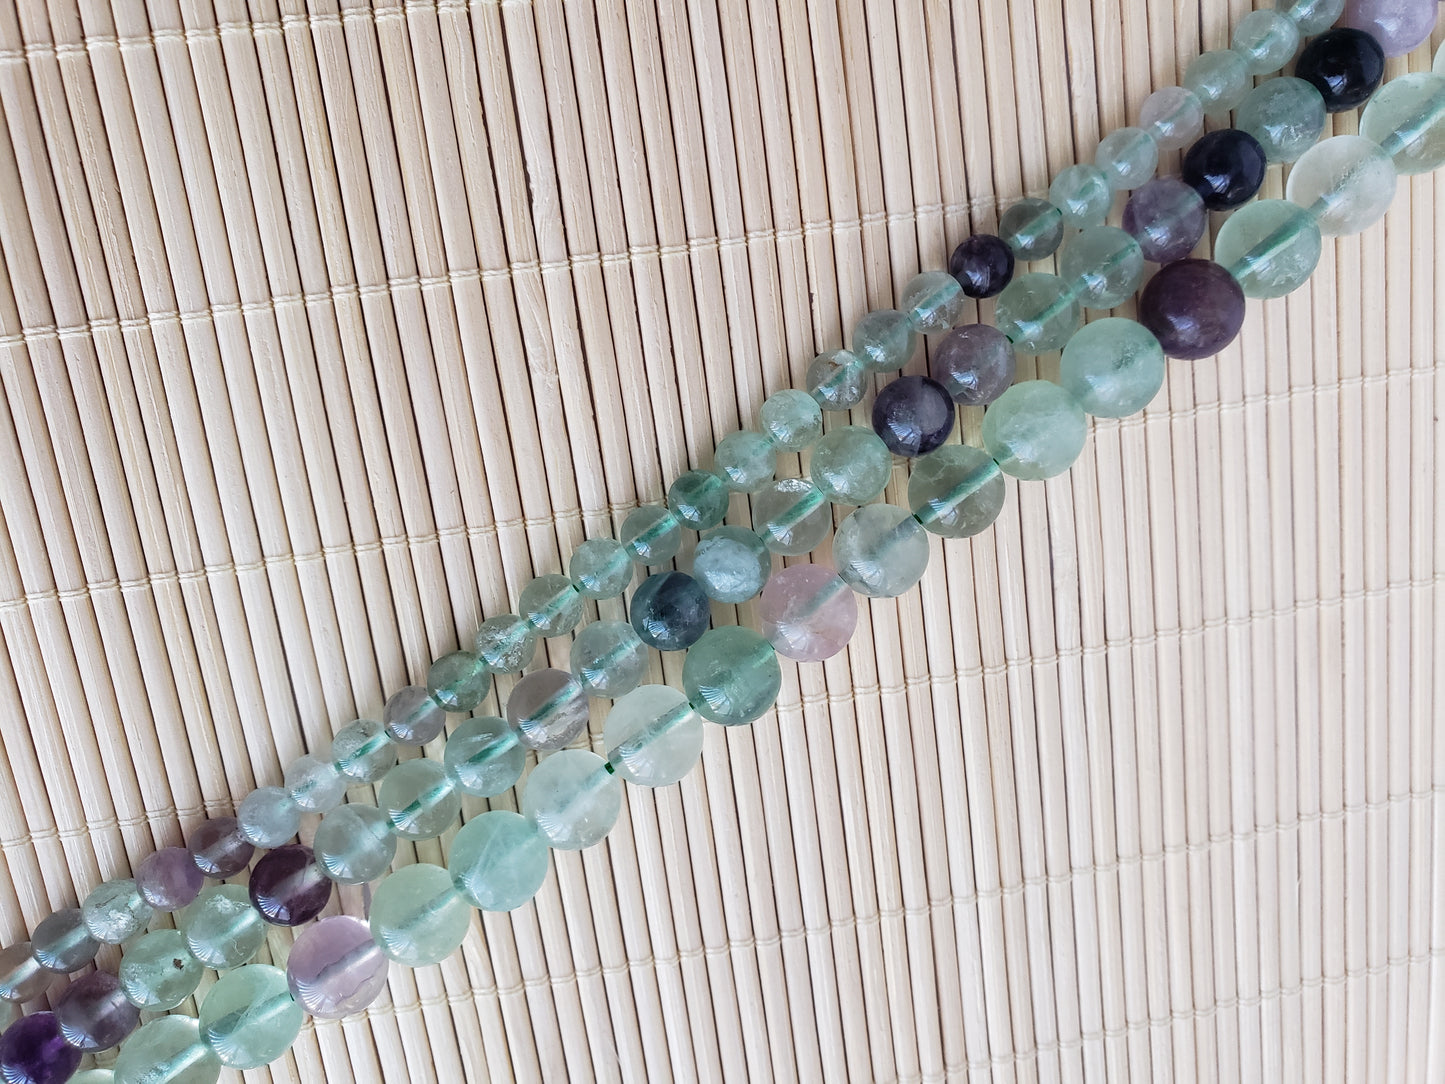 Crafting supplies such as rainbow fluorite beads available at wholesale and retail prices, only at our crystal shop in San Diego!